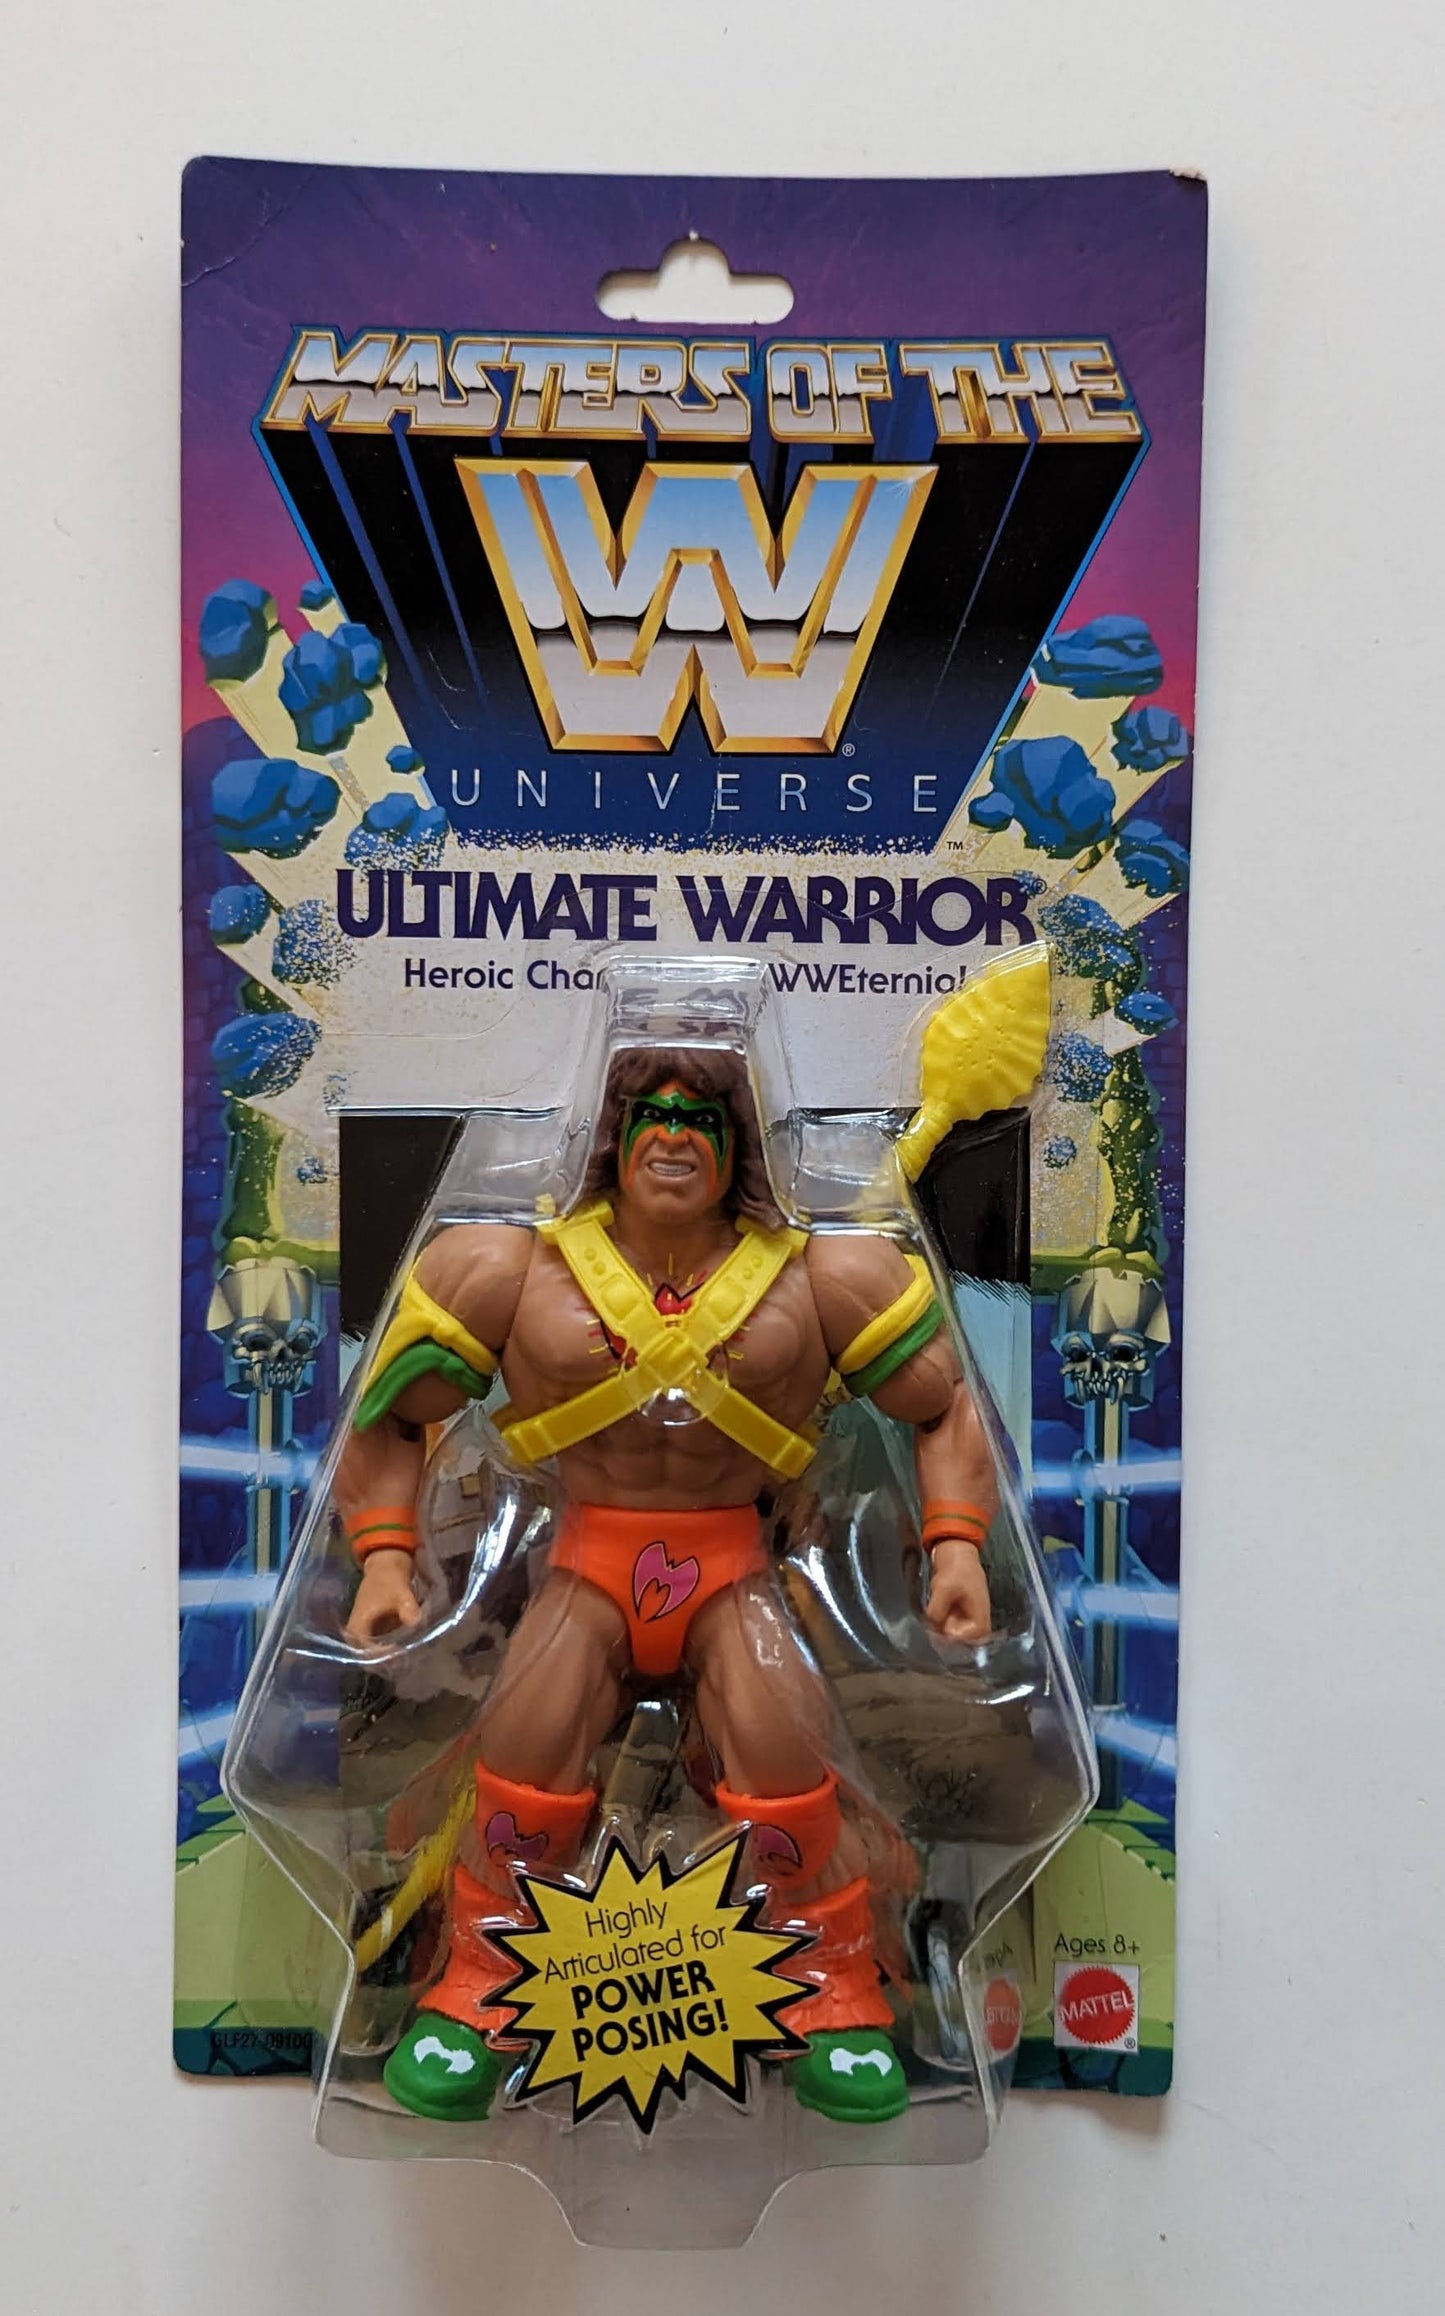 2019 Mattel Masters of the WWE Universe Series 1 Ultimate Warrior [Exclusive]